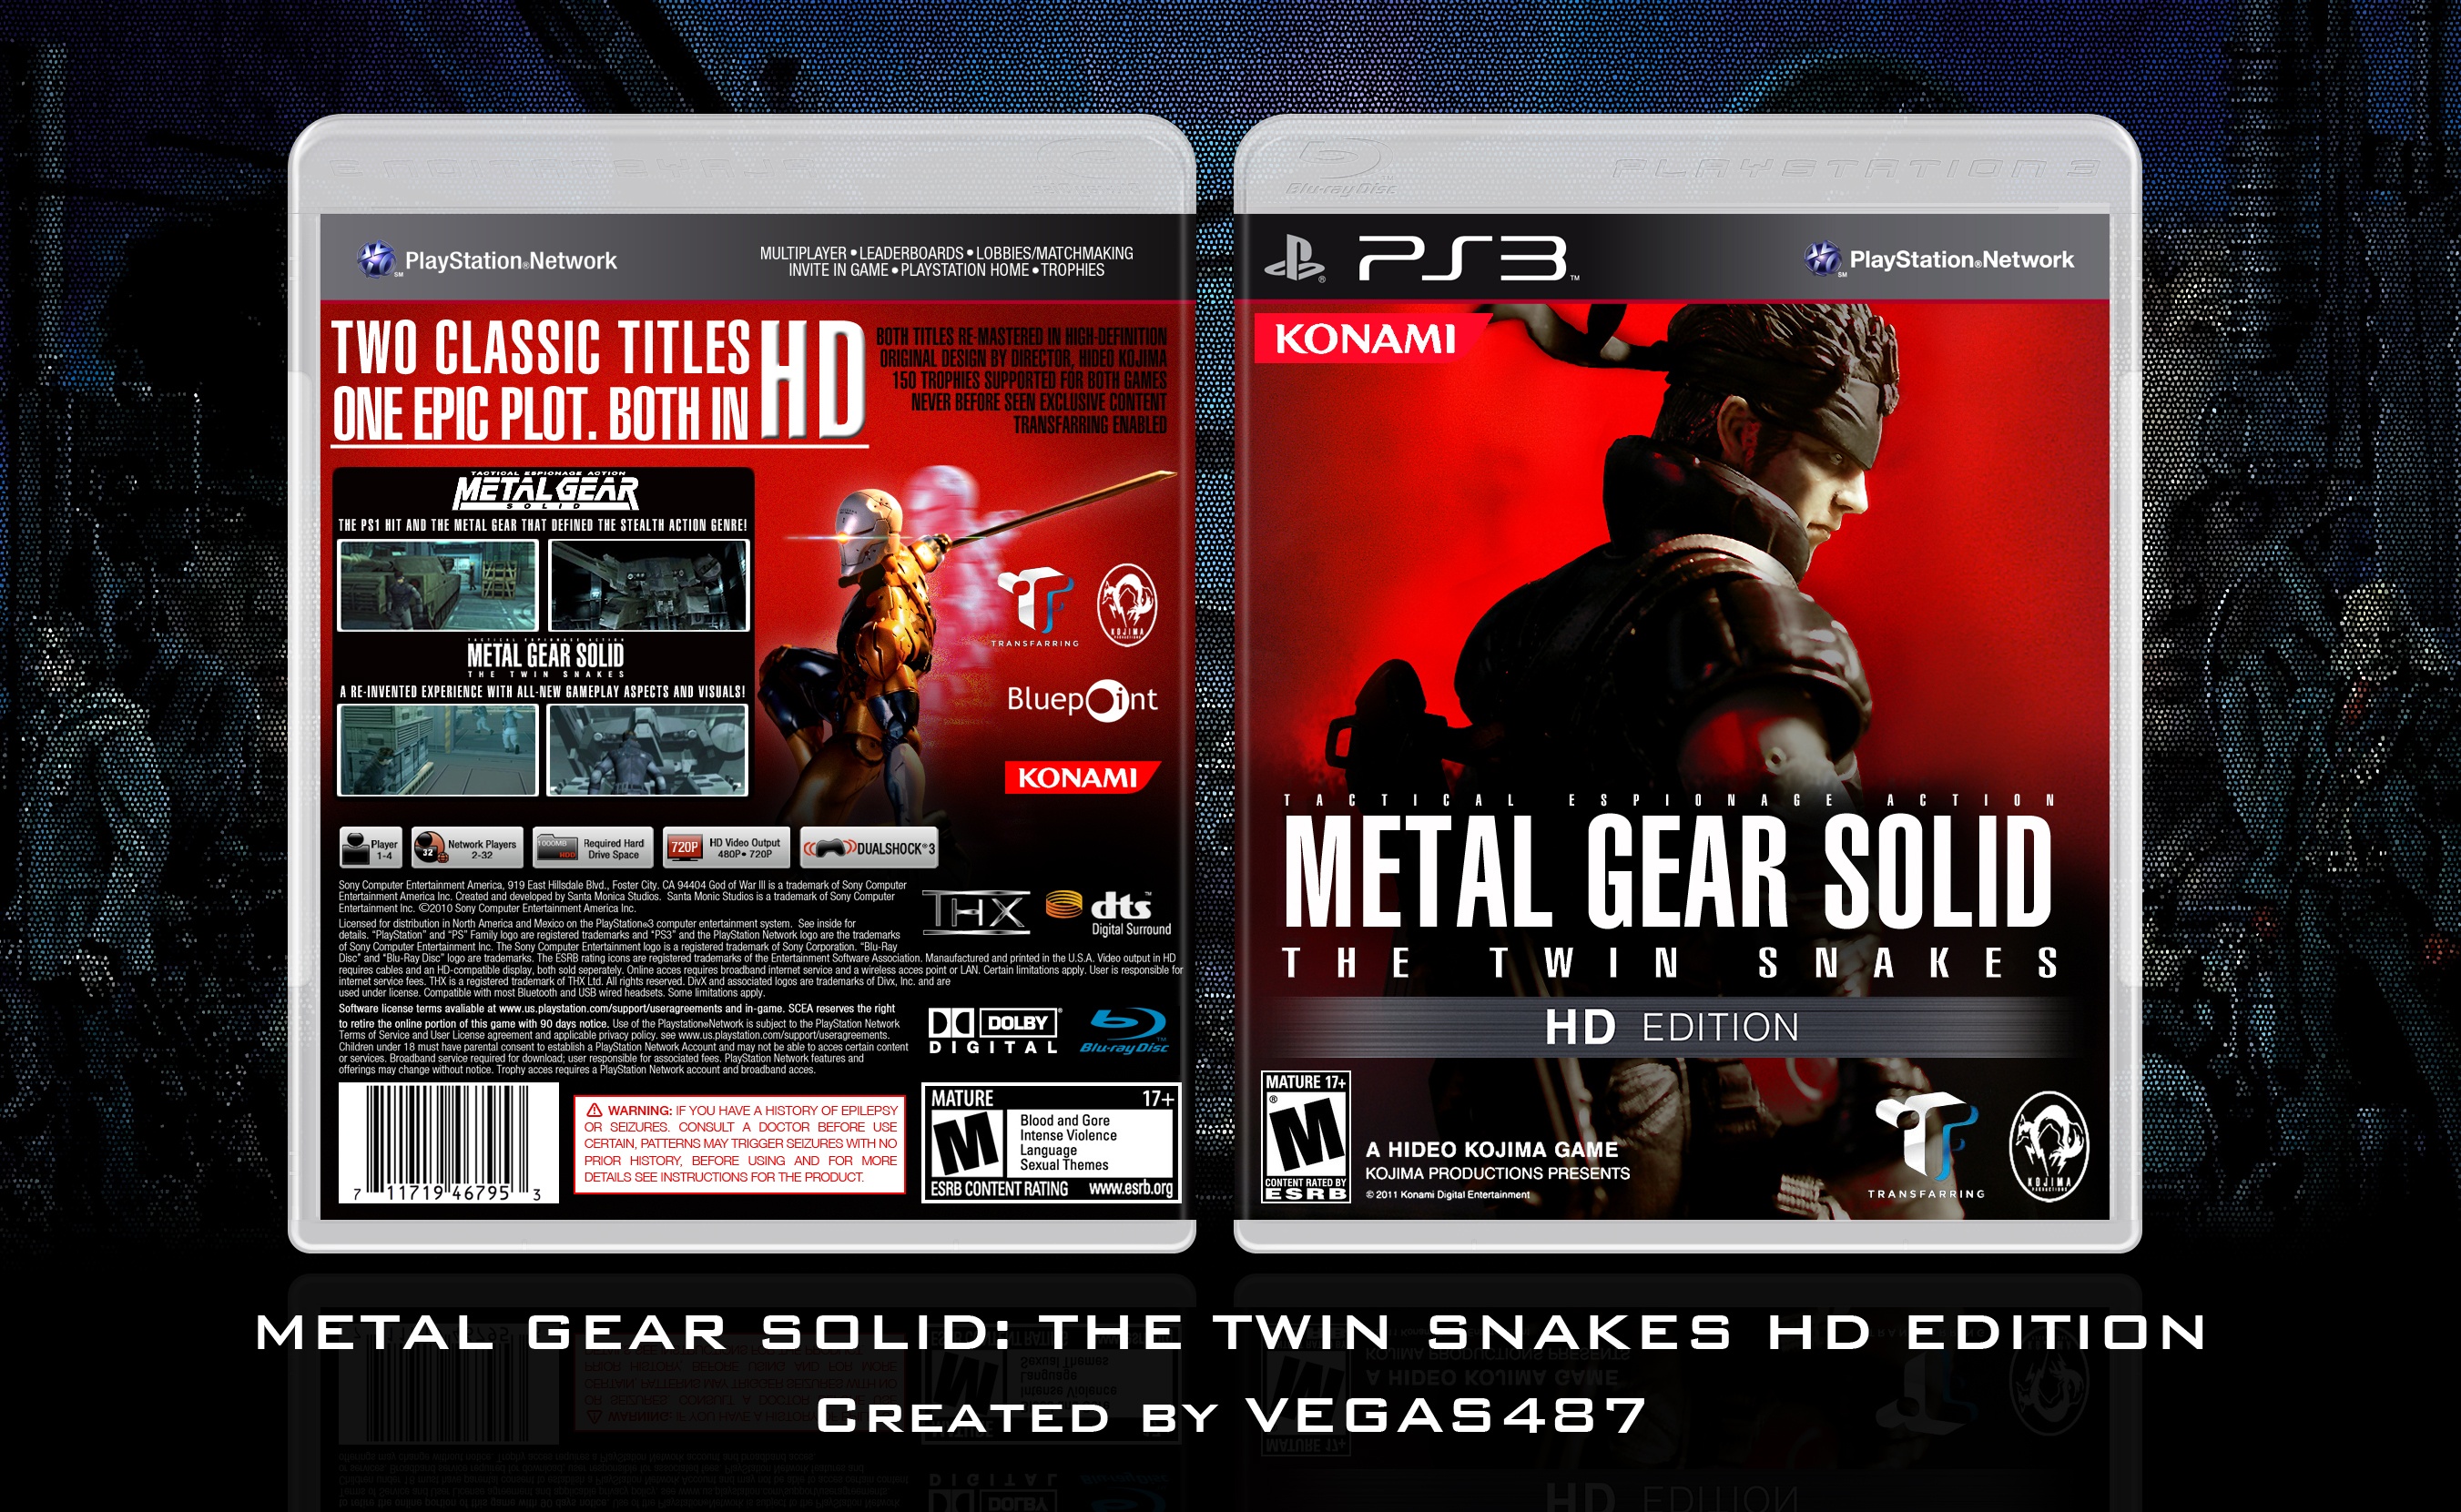 Metal Gear Solid: The Twin Snakes HD Edition box cover